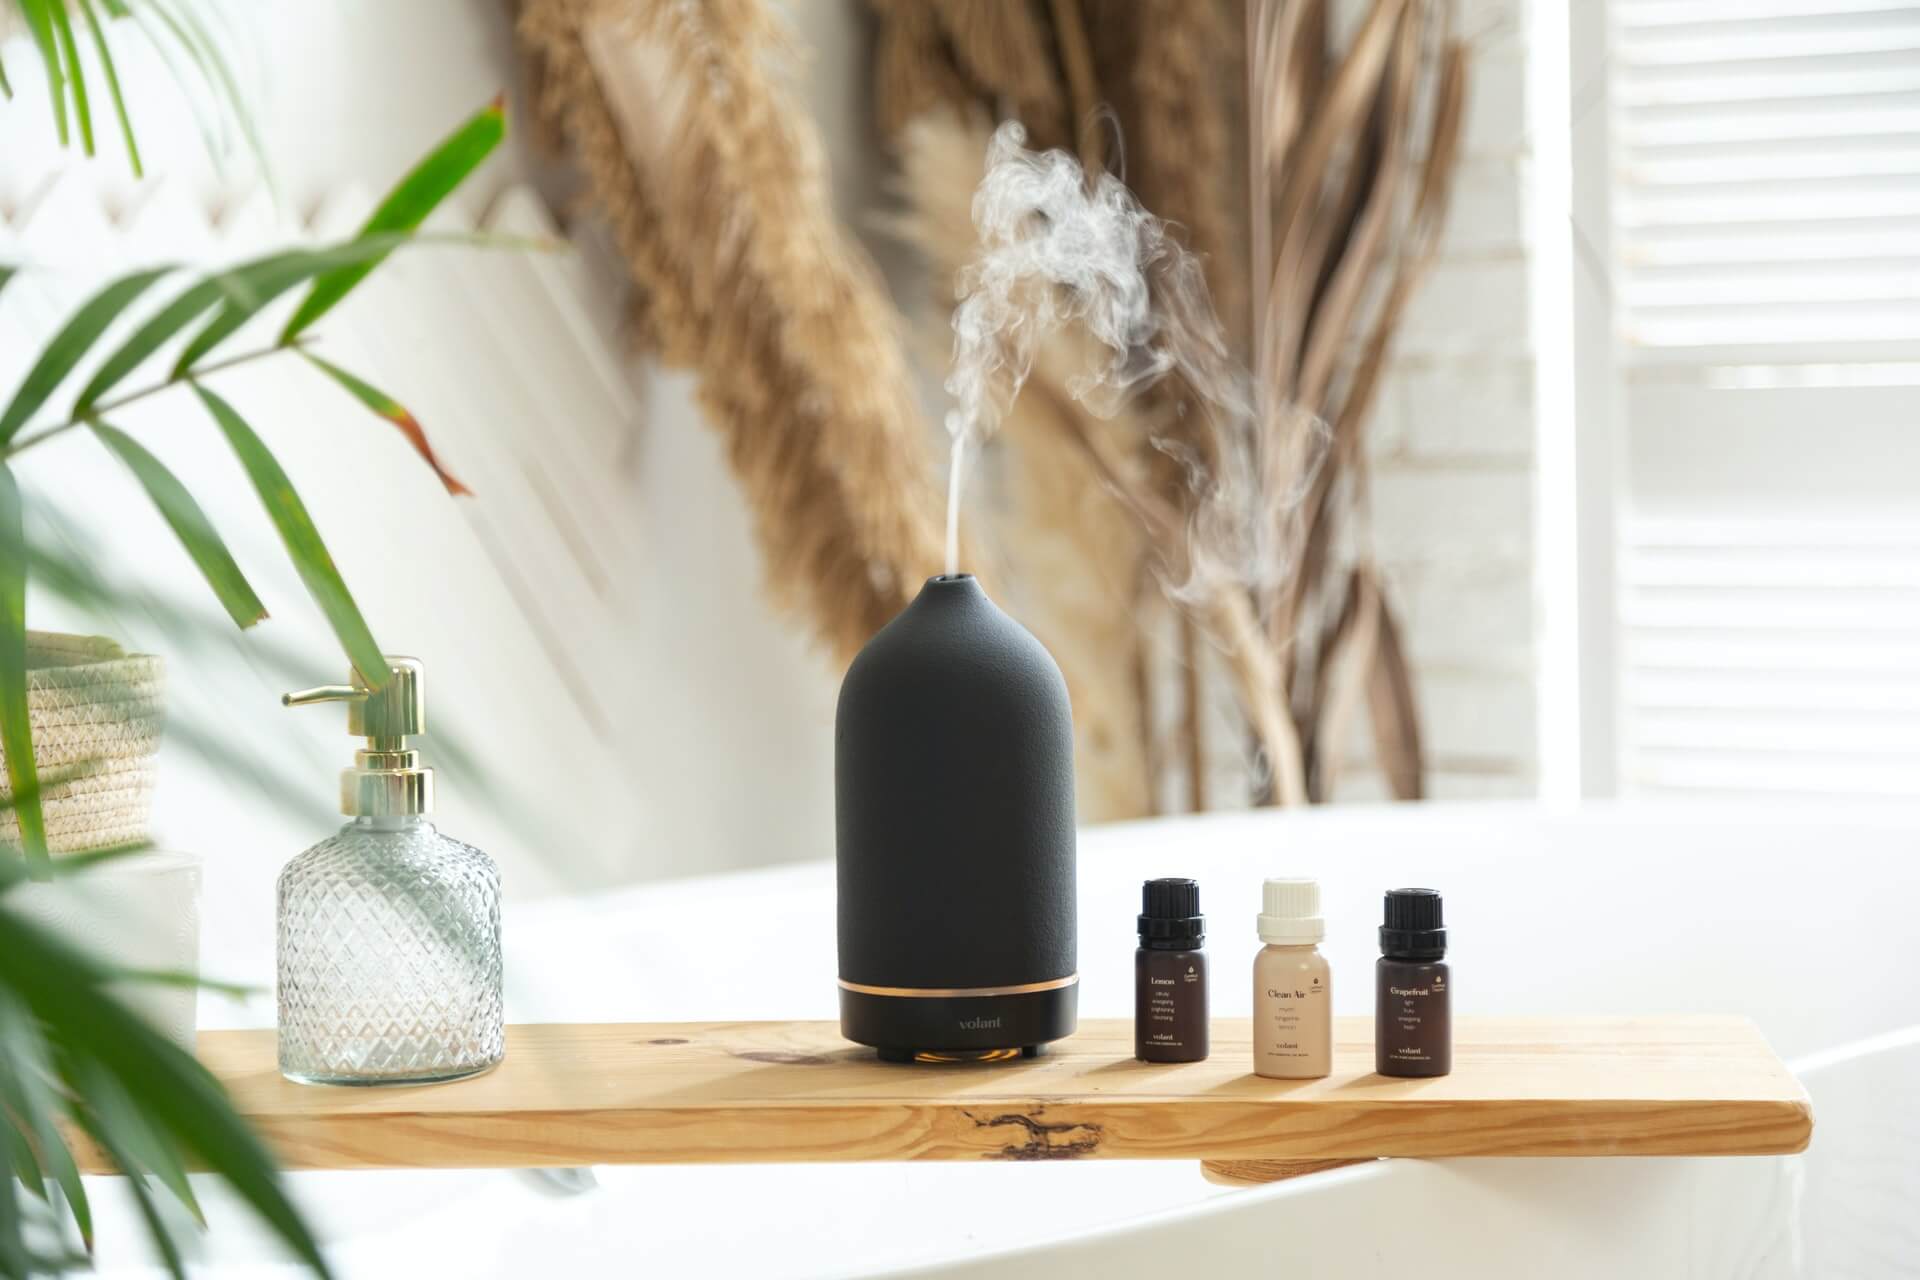 Benefits of Doing an Aromatherapy within Your Home Cleaning Routine